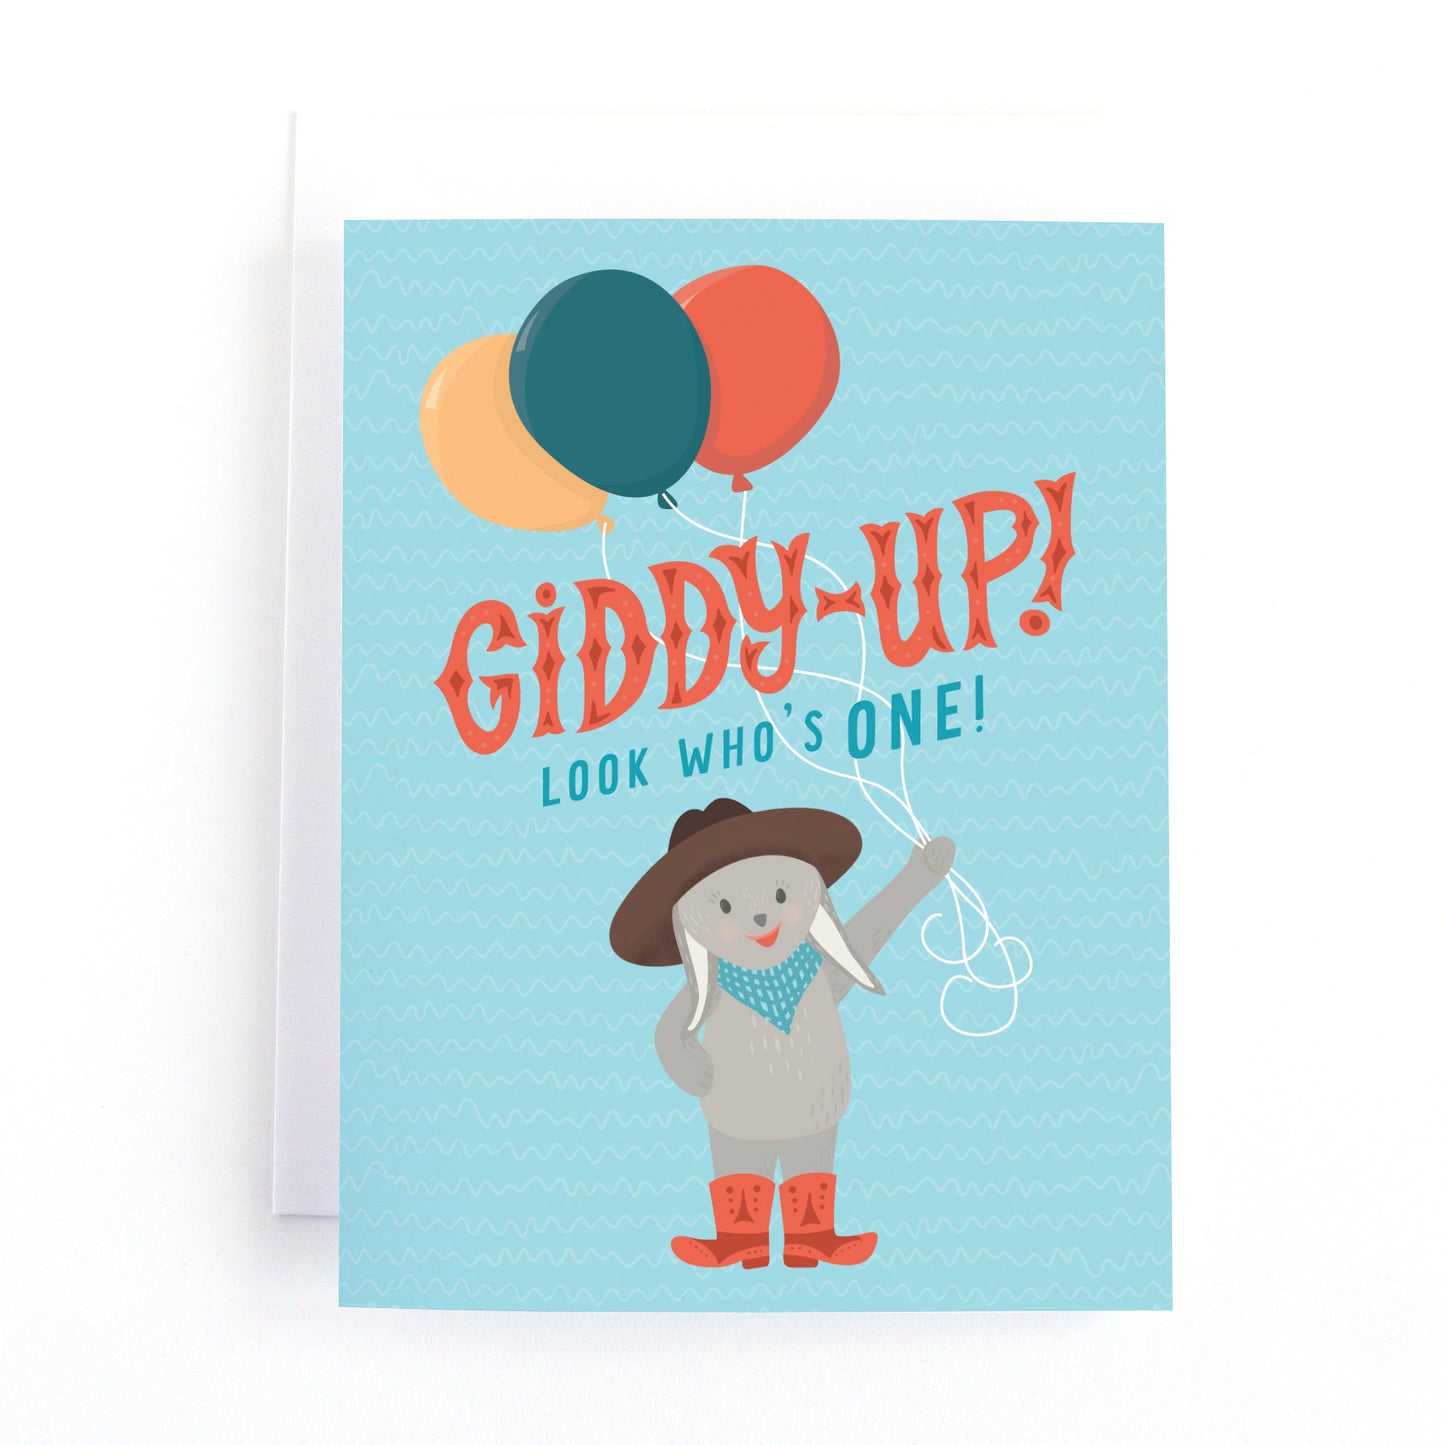 Cute cowboy themed first birthday card  witha bunny rabbit holding a bunch of balloons and the text, Giddy up! look who's one!